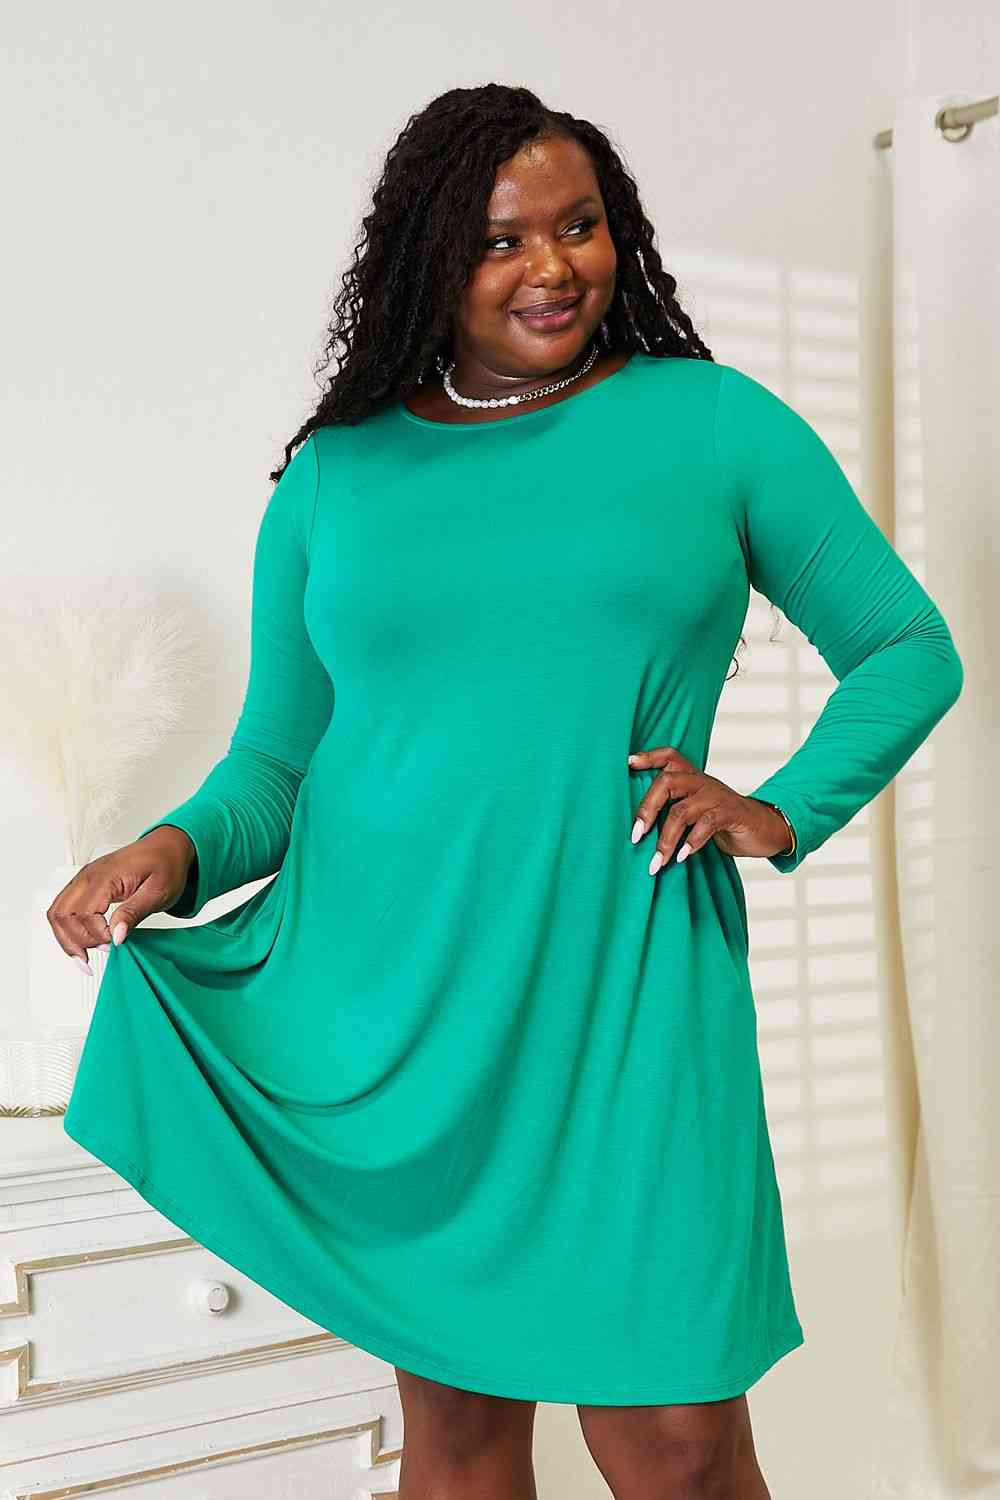 Long Sleeve Flare Dress with Pockets - Teal / S - All Dresses - Dresses - 1 - 2024